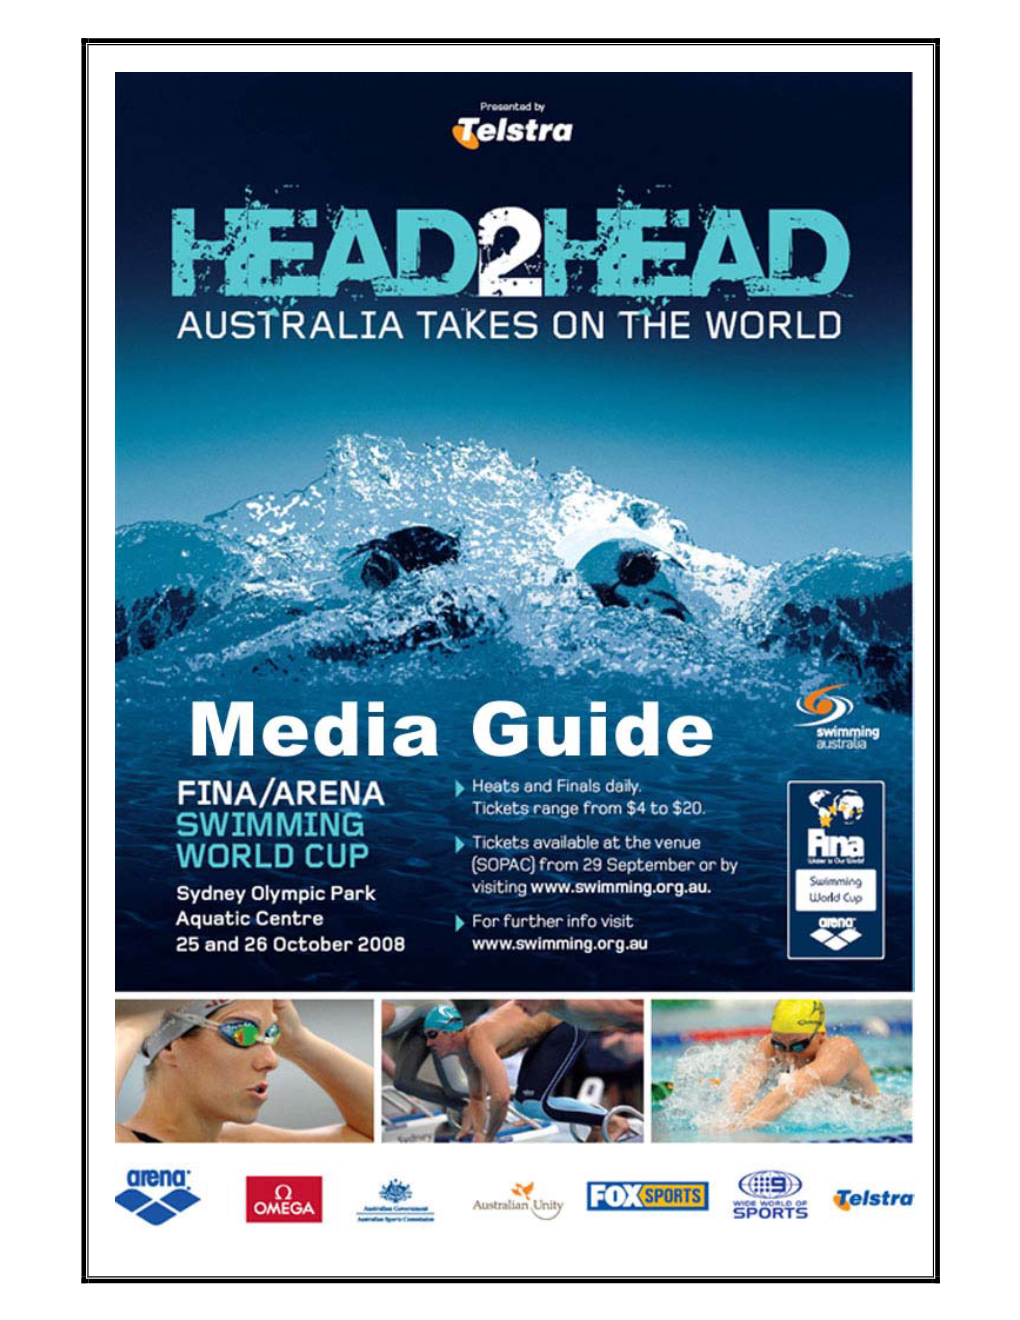 2008 FINA ARENA World Cup Presented by Telstra Media Guide